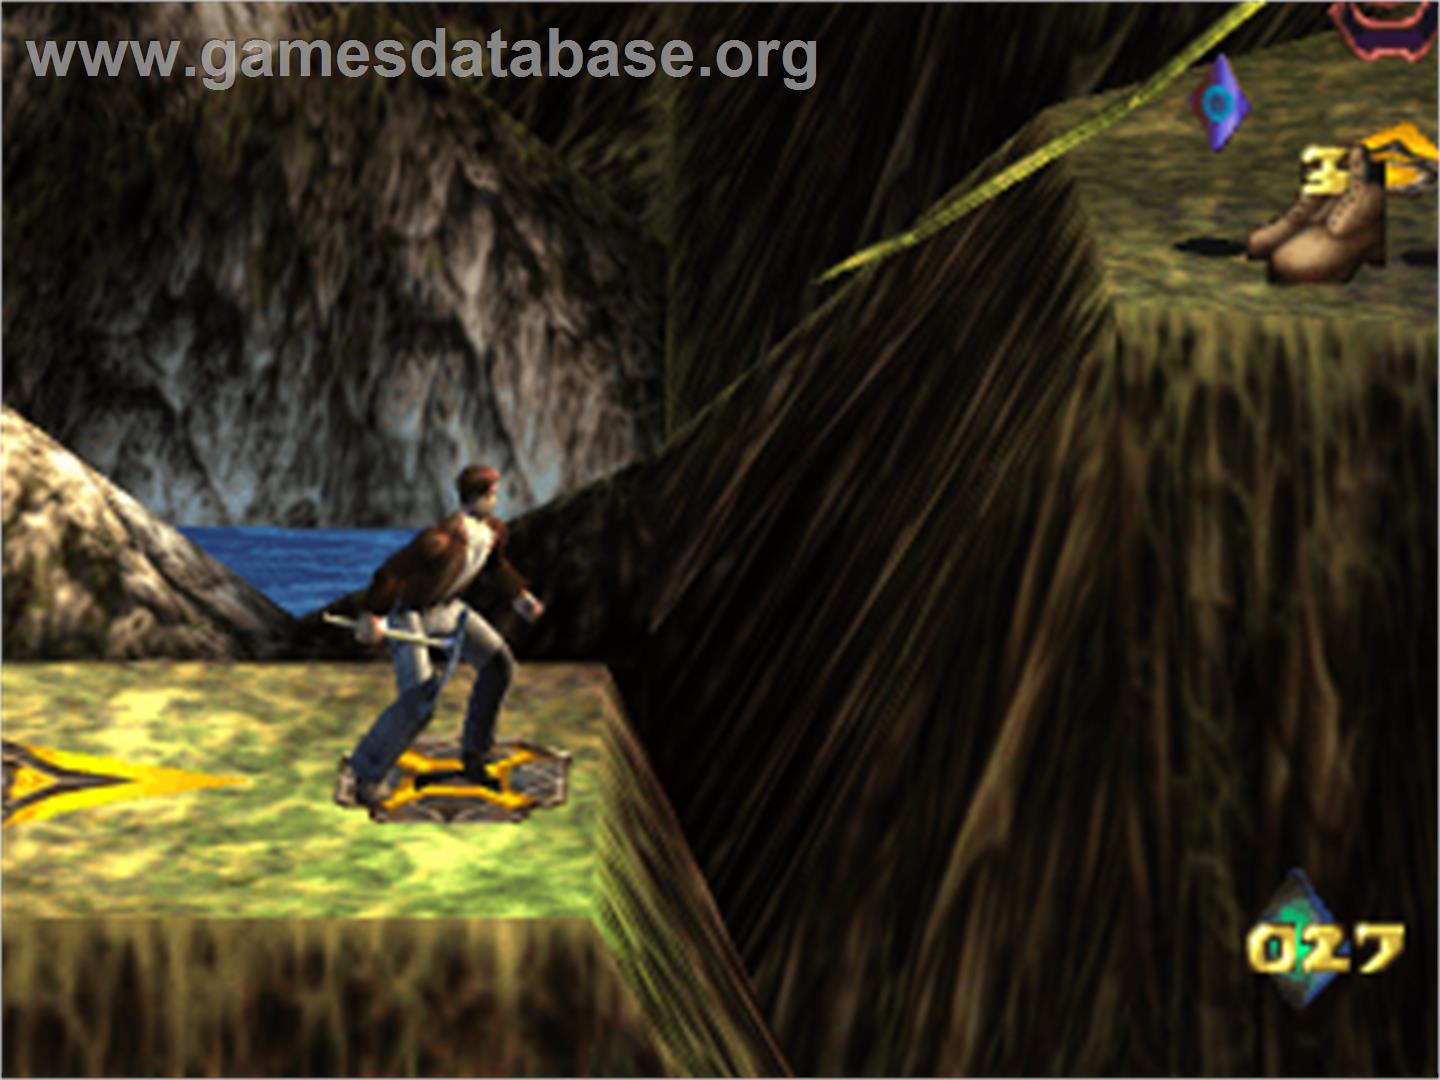 Pitfall 3D: Beyond the Jungle - Sony Playstation - Artwork - In Game